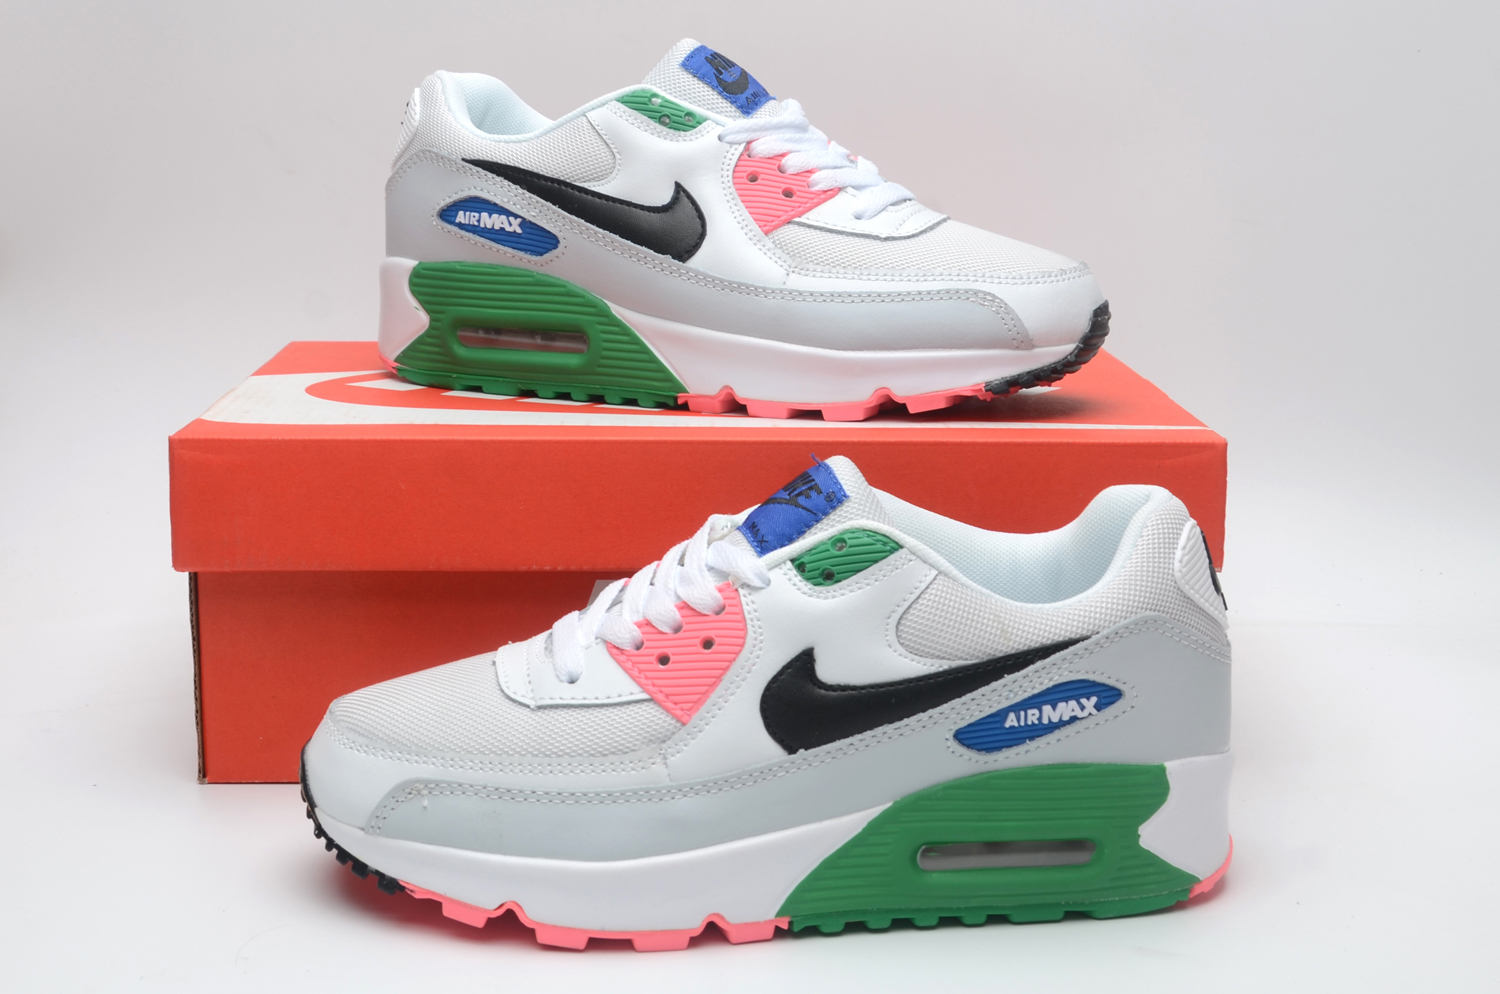 Men's Running weapon Air Max 90 Shoes 052